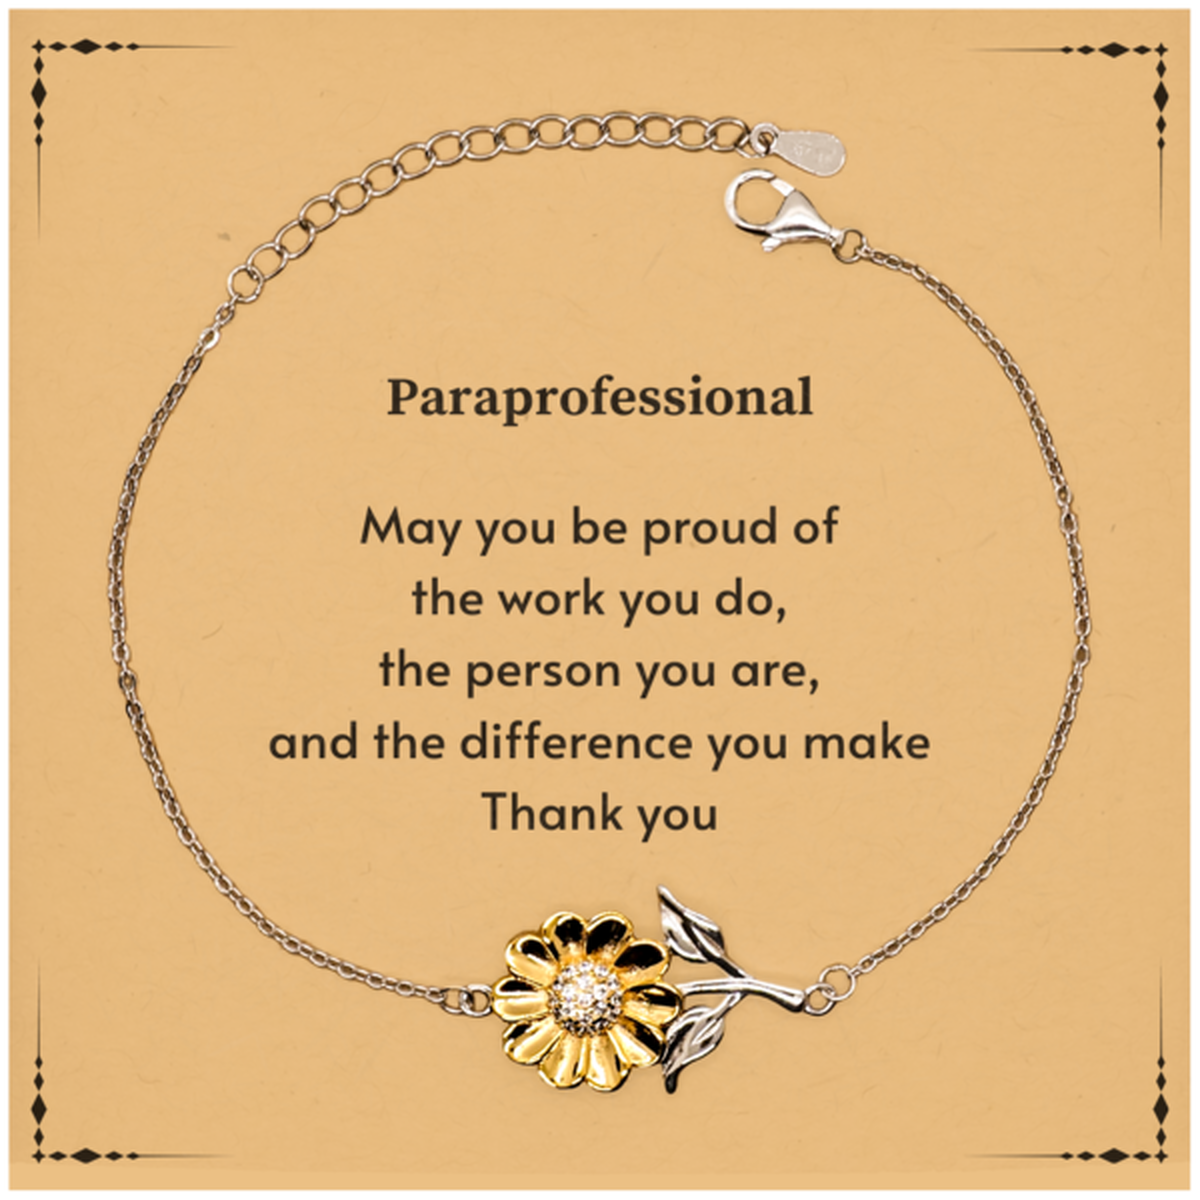 Heartwarming Sunflower Bracelet Retirement Coworkers Gifts for Paraprofessional, Paraprofessional May You be proud of the work you do, the person you are Gifts for Boss Men Women Friends